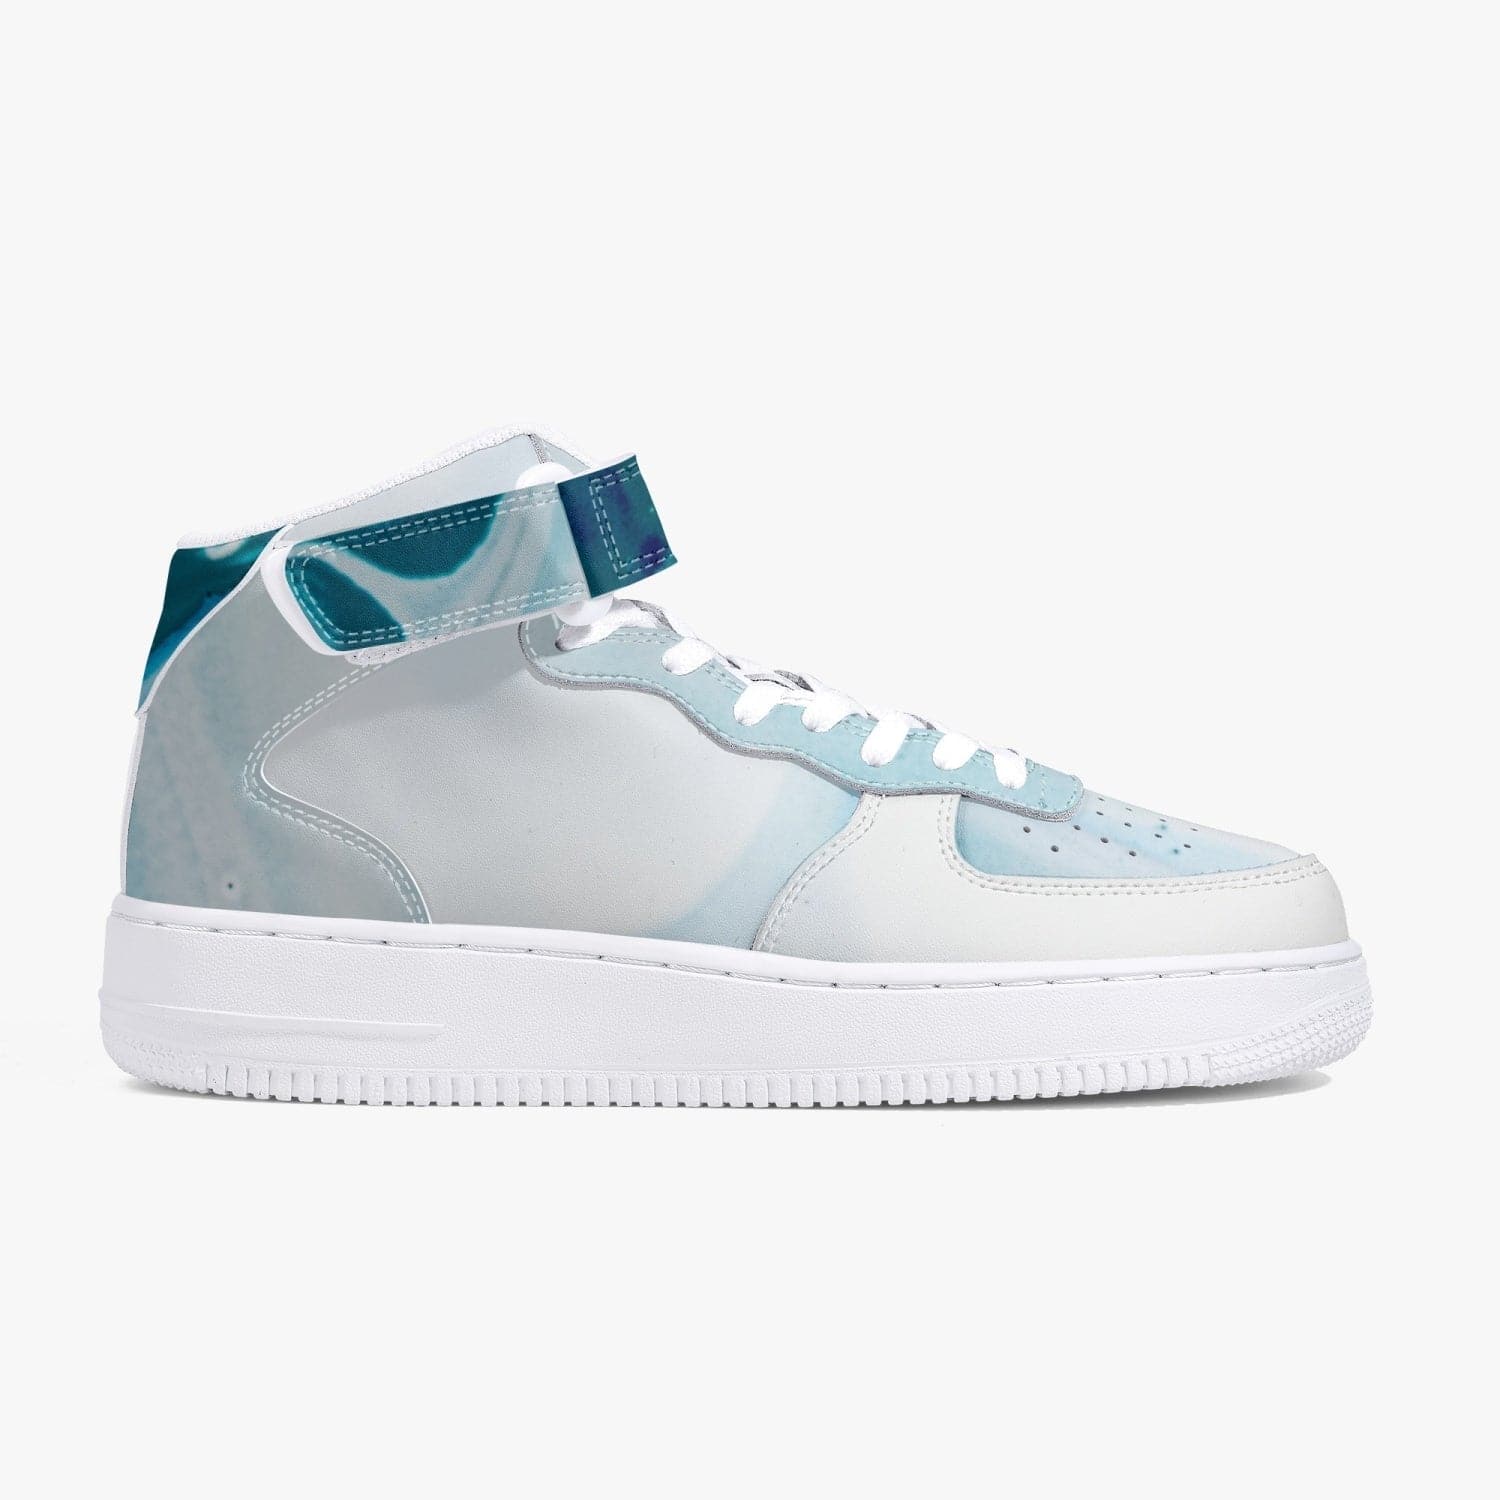 Heavenly Blue - High-Top Leather Sports Sneakers, designed by Sensus Studio